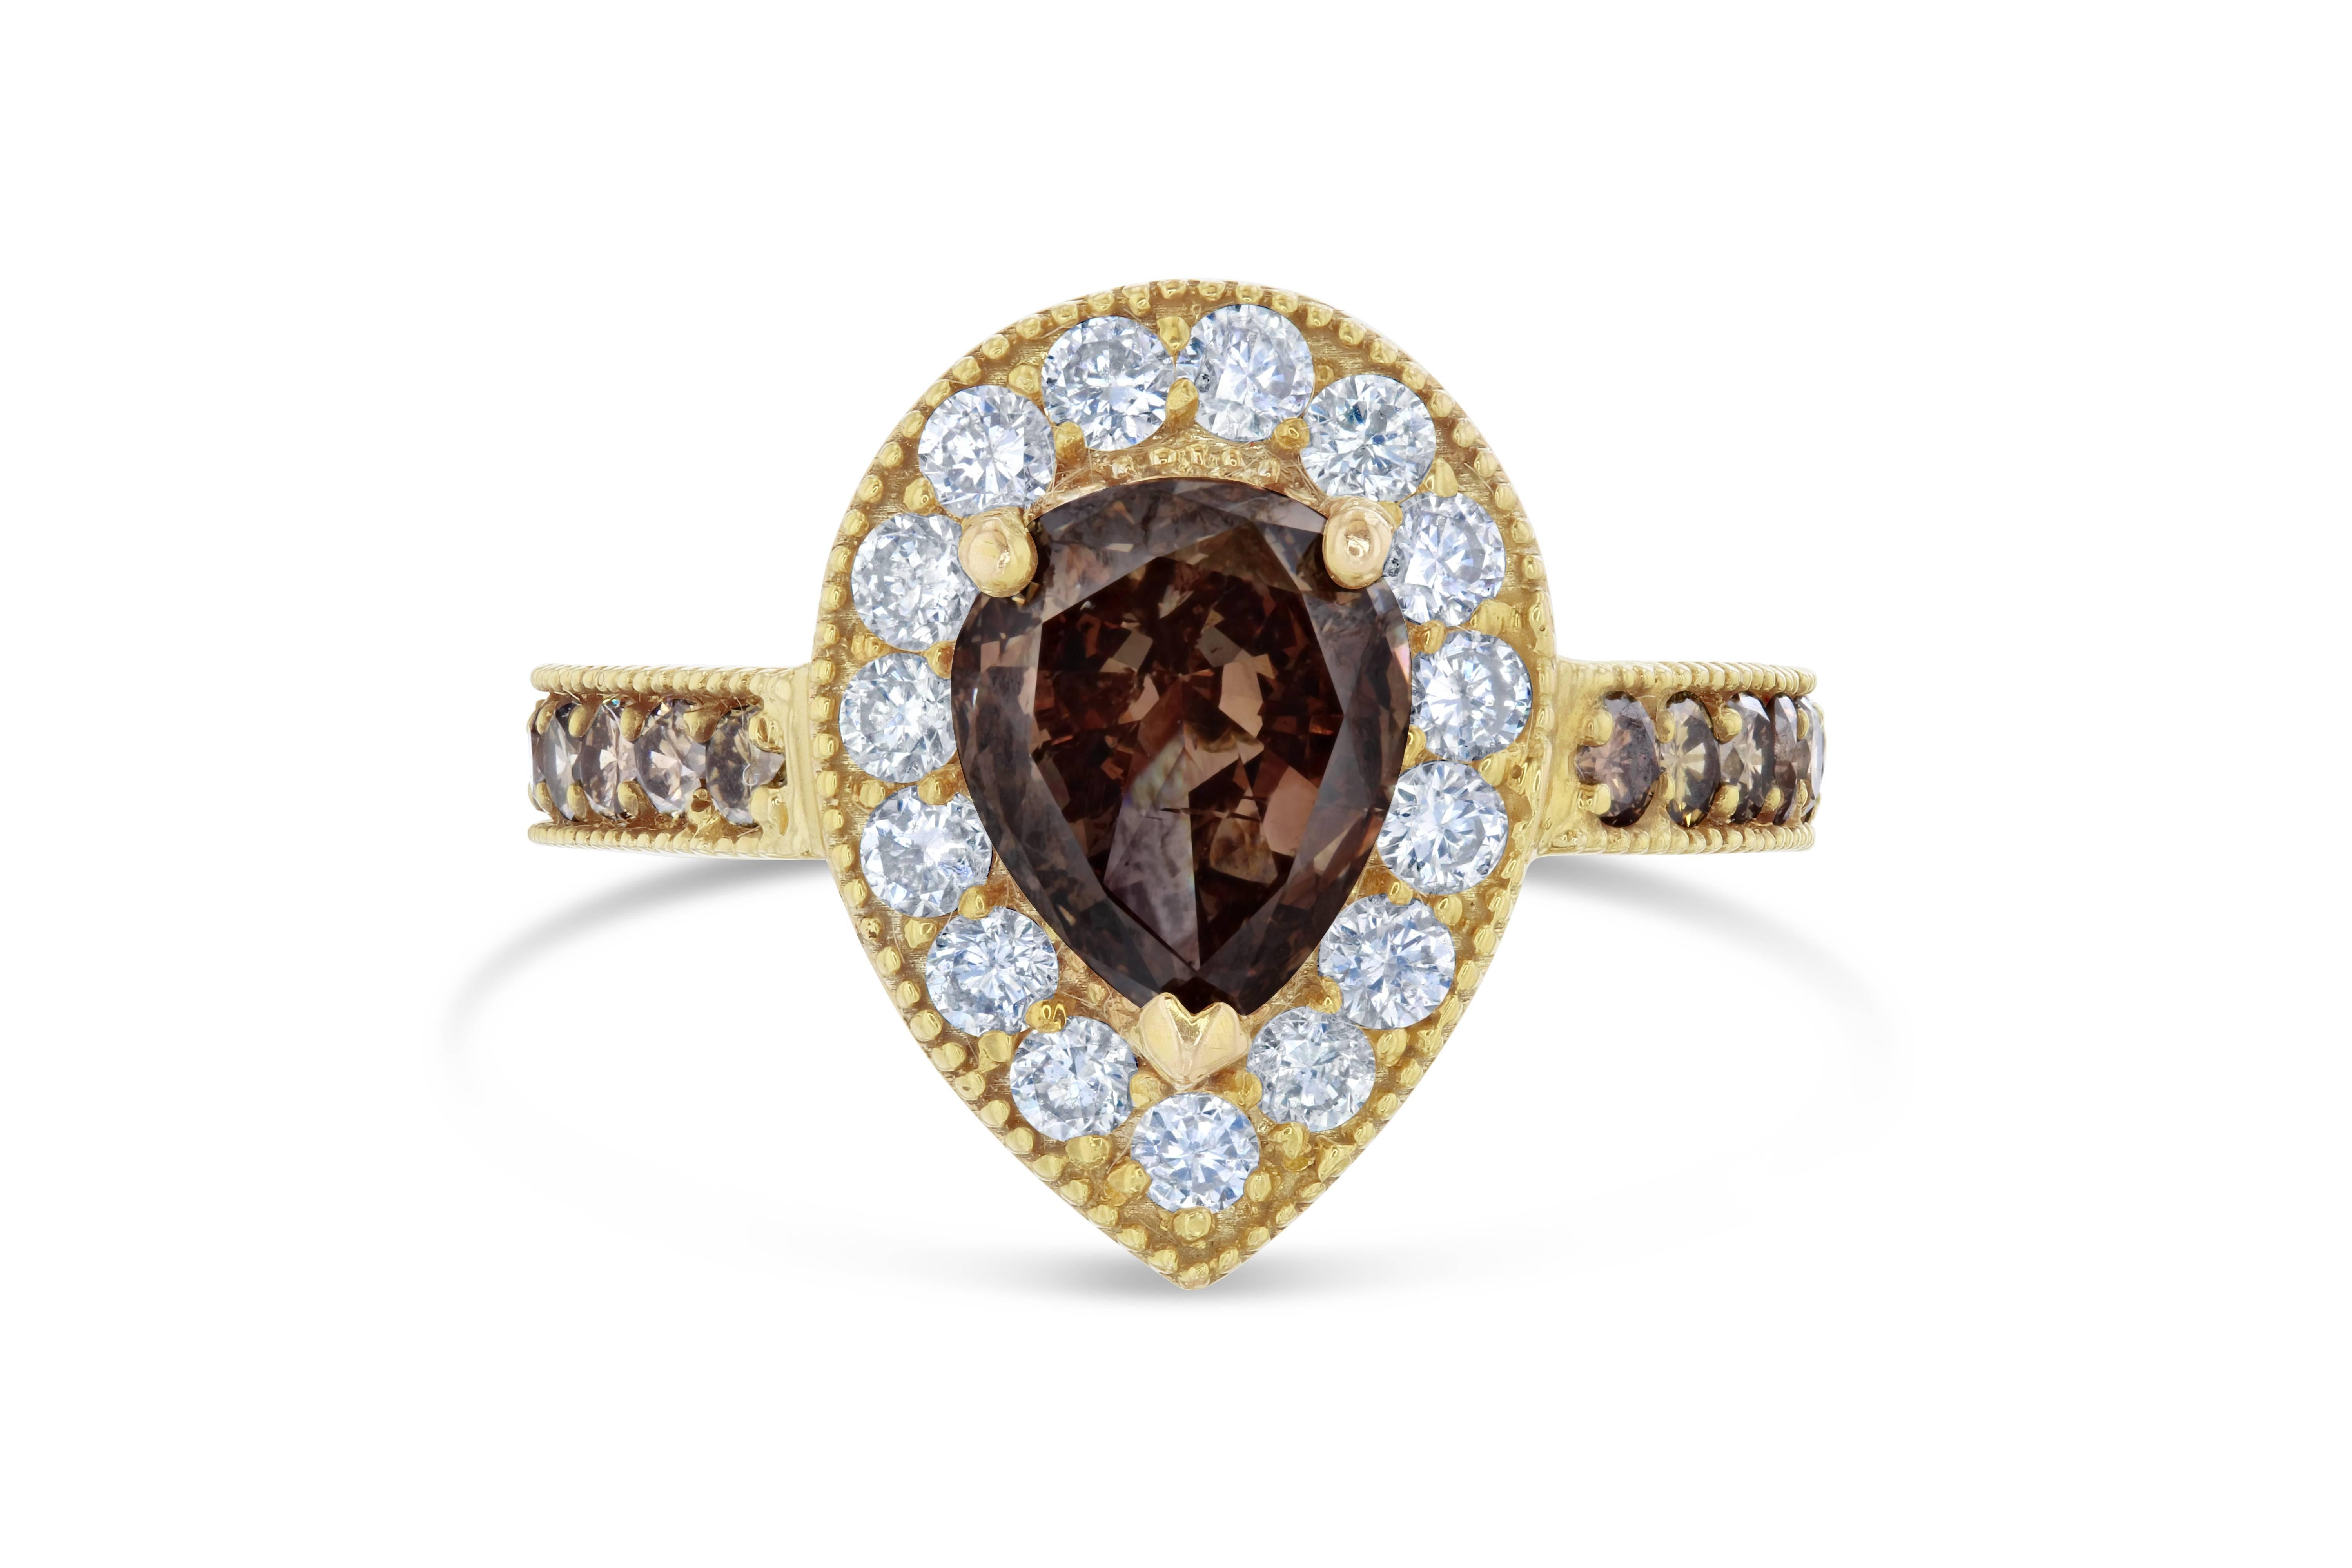 This versatile victorian-inspired ring can be an engagement ring, cocktail or simply an everyday ring!

The center diamond is a natural, fancy colored pear cut brown diamond weighing 1.68 carats. The ring is surrounded by a single halo of 15 round